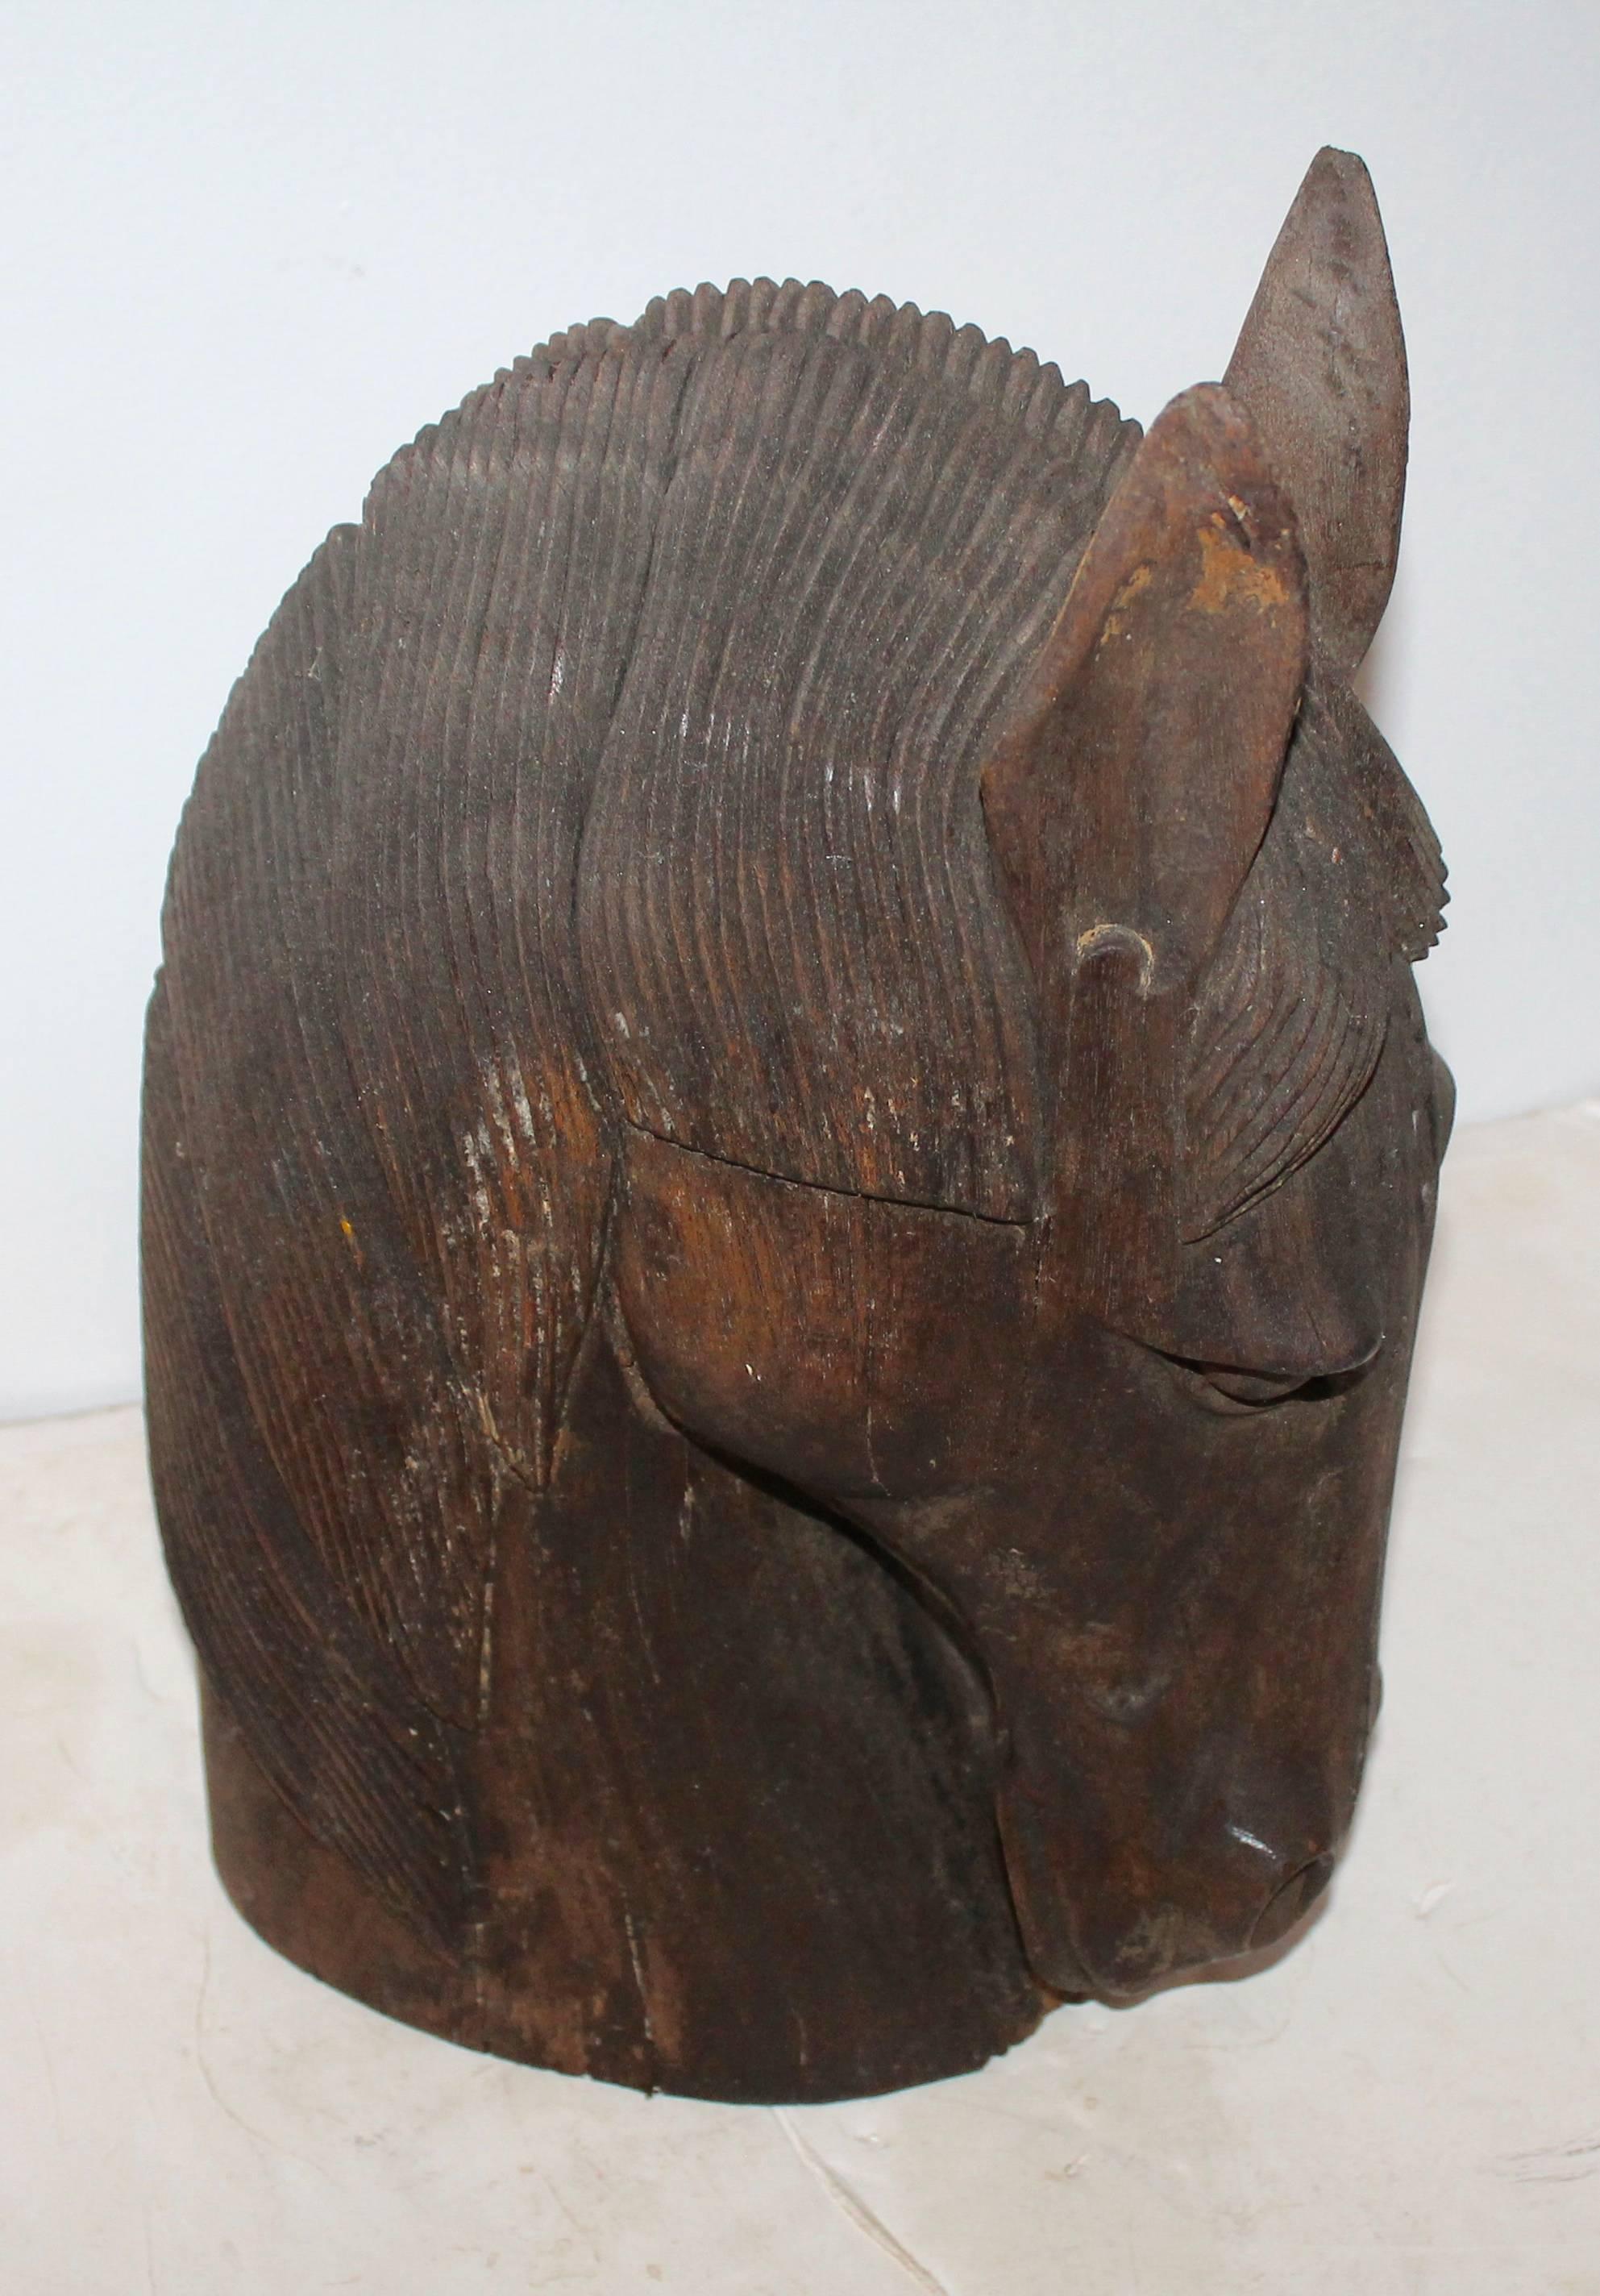 This fantastic hand-carved horse head statue is very well carved and in good condition. A couple age cracks consistent with age and use.